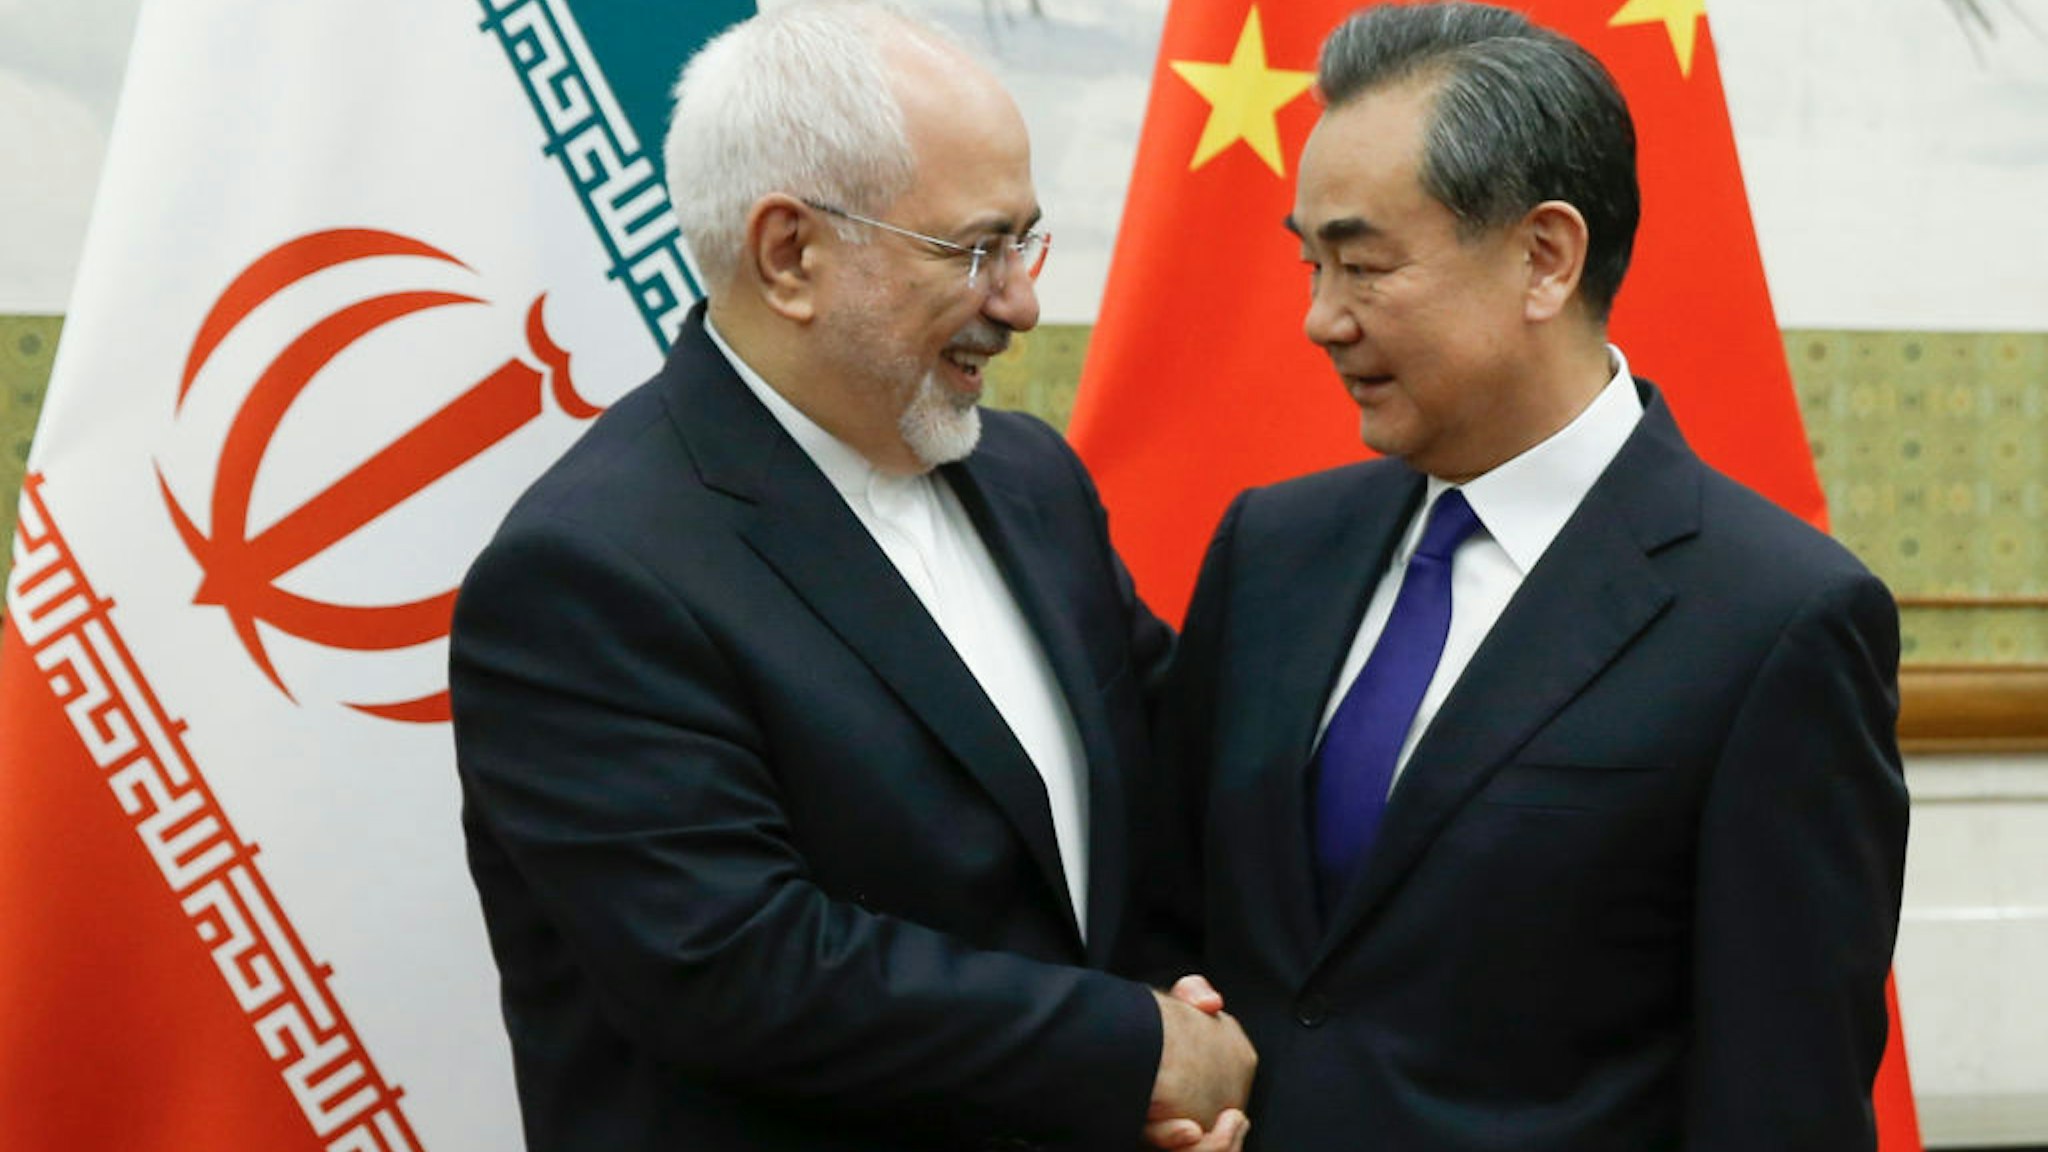 Chinese State Councillor and Foreign Minister Wang Yi meets Iranian Foreign Minister Mohammad Javad Zarif at Diaoyutai state guesthouse on May 13, 2018 in Beijing, China.